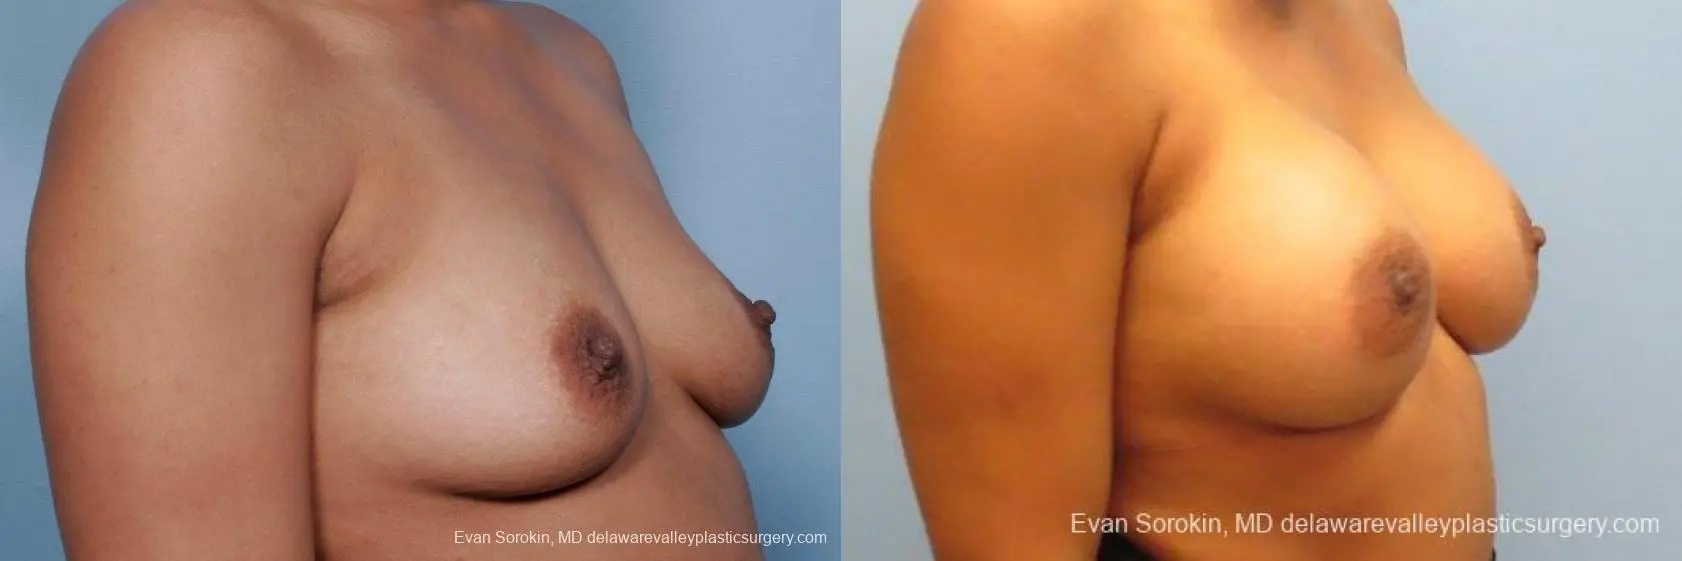 Philadelphia Breast Augmentation 9387 - Before and After 2